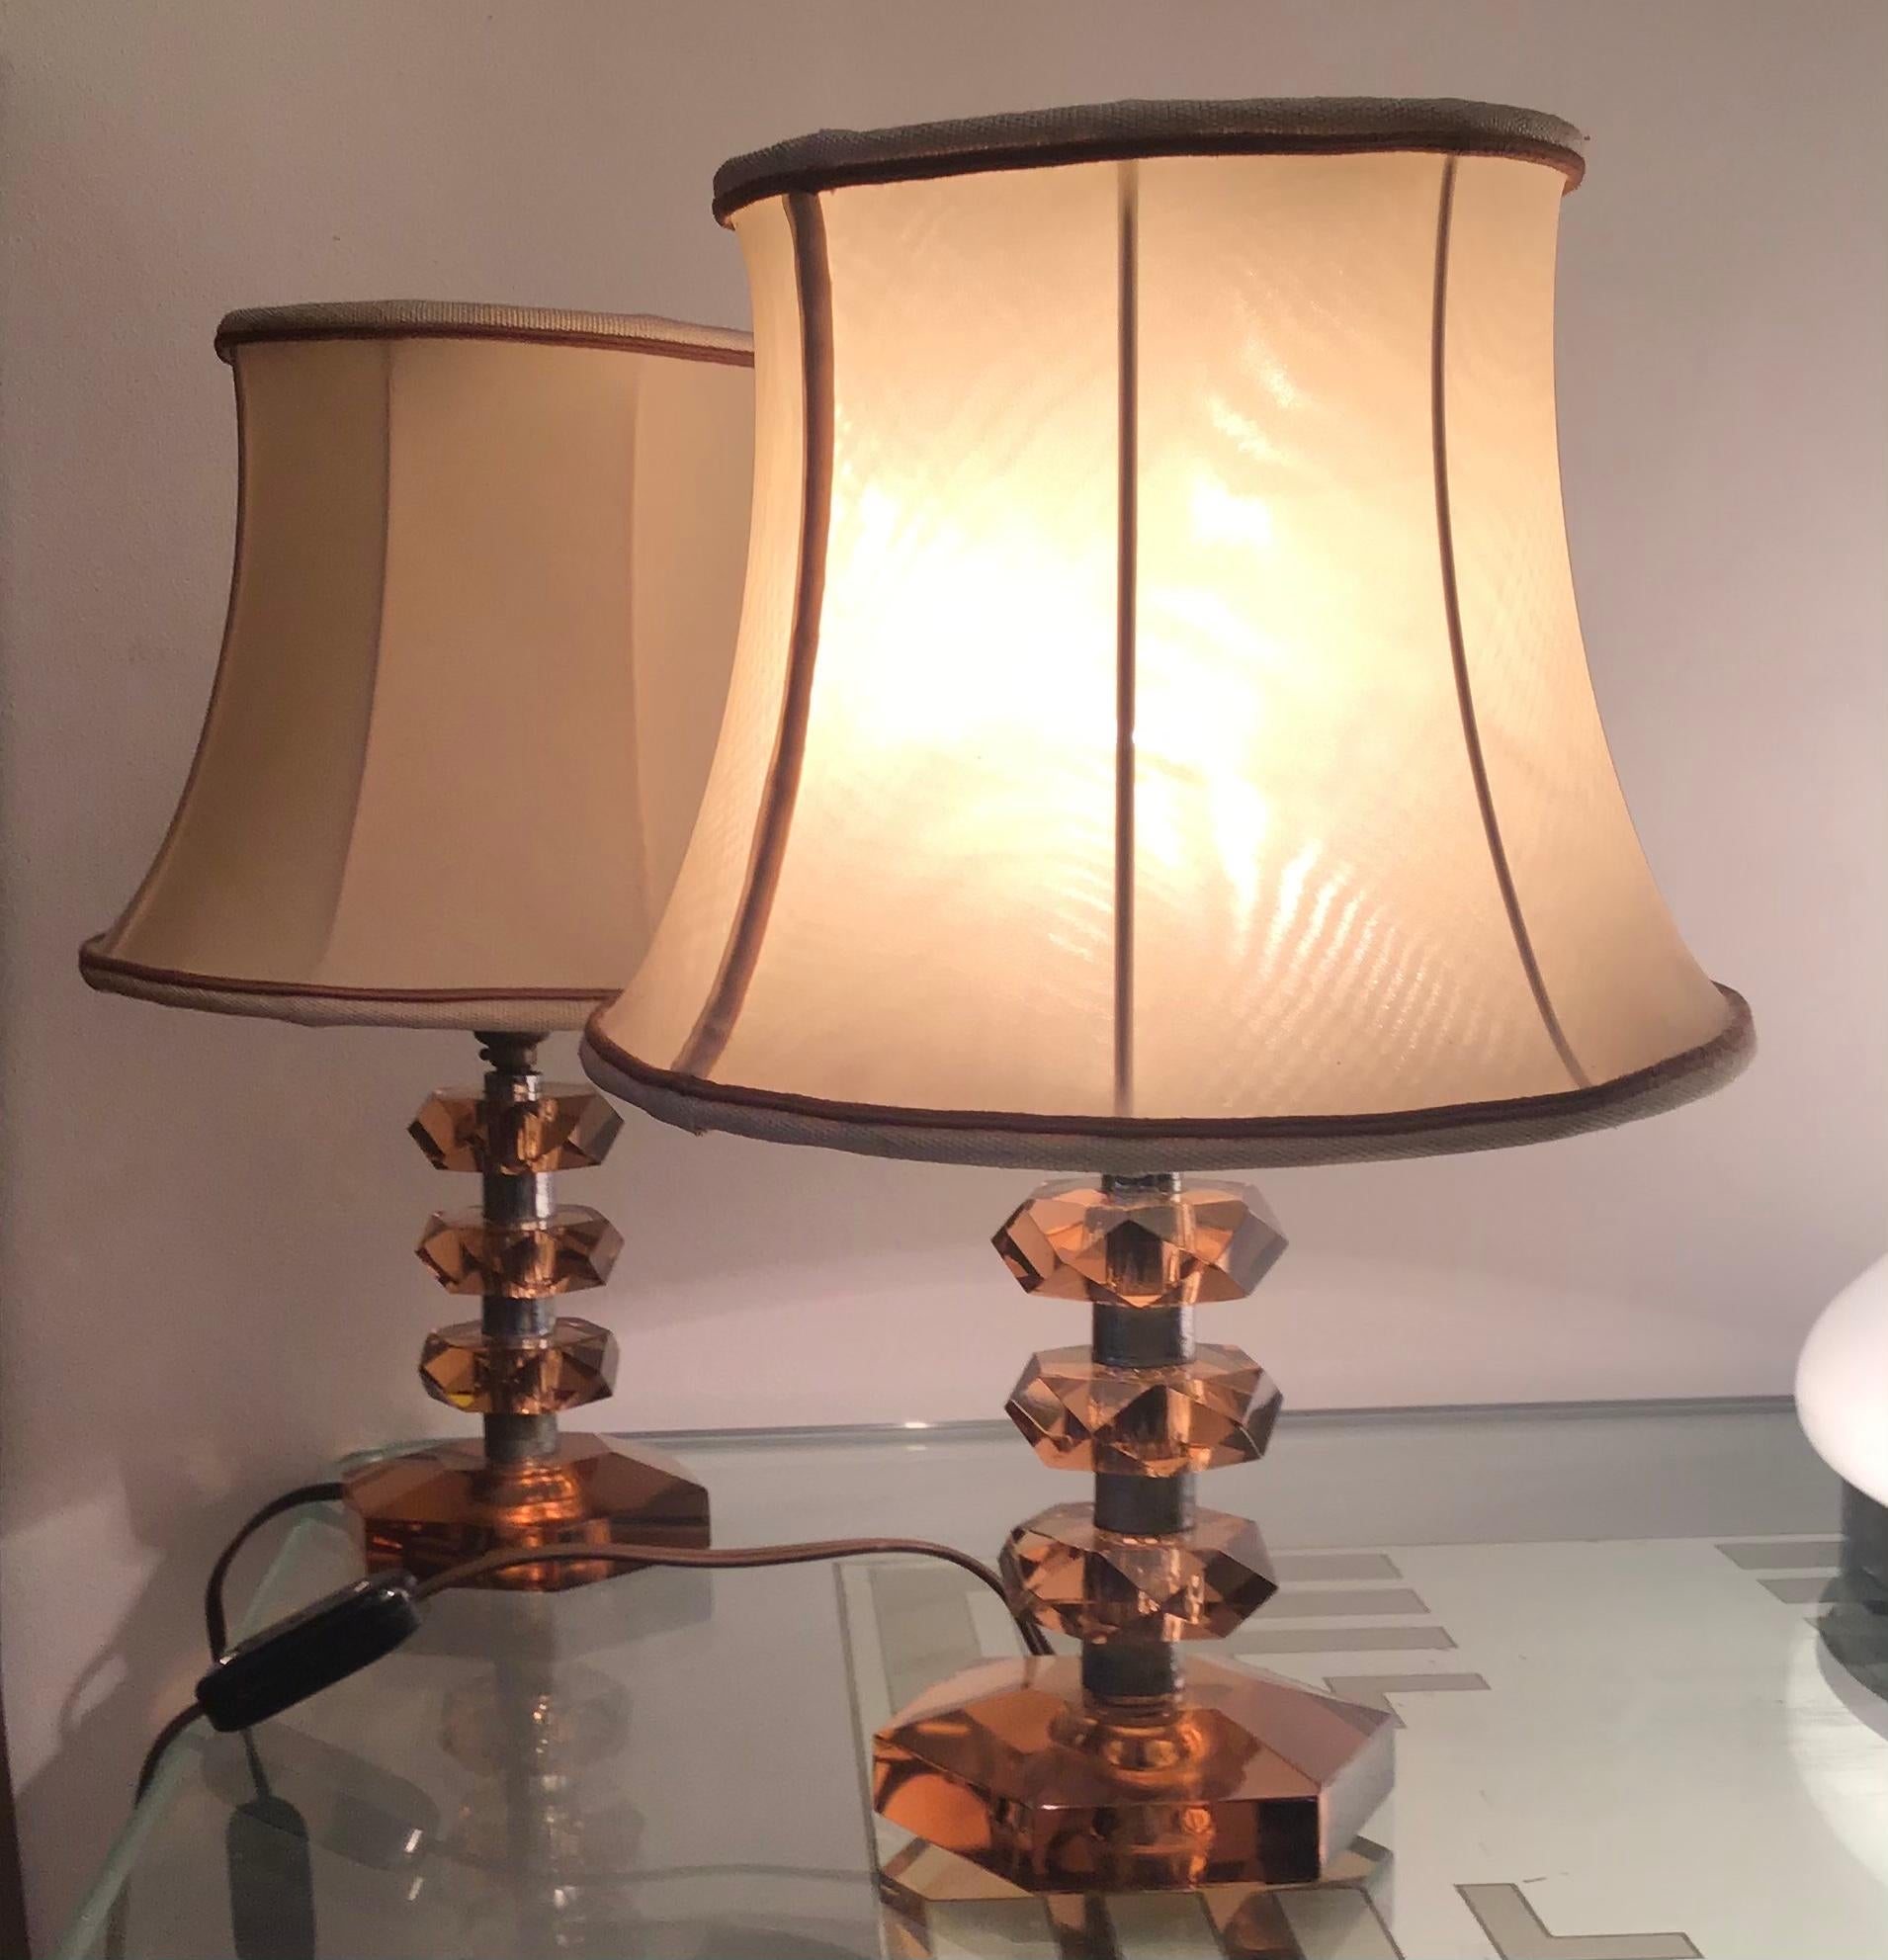 Cristal Arte Table Lamps Glass Metal Crome Fabric Lampshade, 1950, Italy In Excellent Condition For Sale In Milano, IT